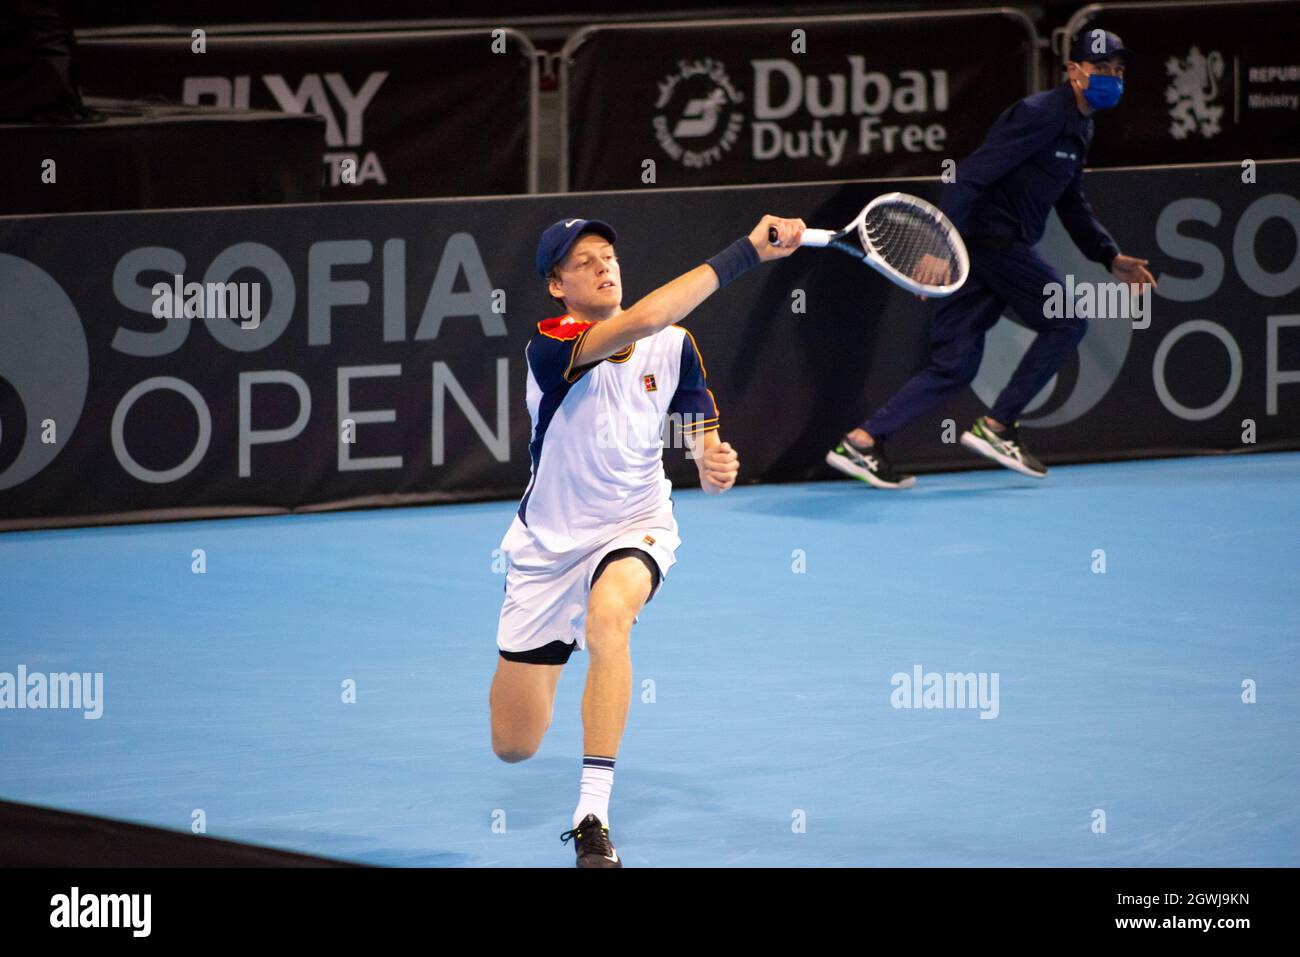 Jannik Sinner of Italy in action against Gael Monfils of France during the men's singles final of the Sofia Open 2021 ATP 250 indoor tennis tournament on hard courts Alamy Live News Stock Photo